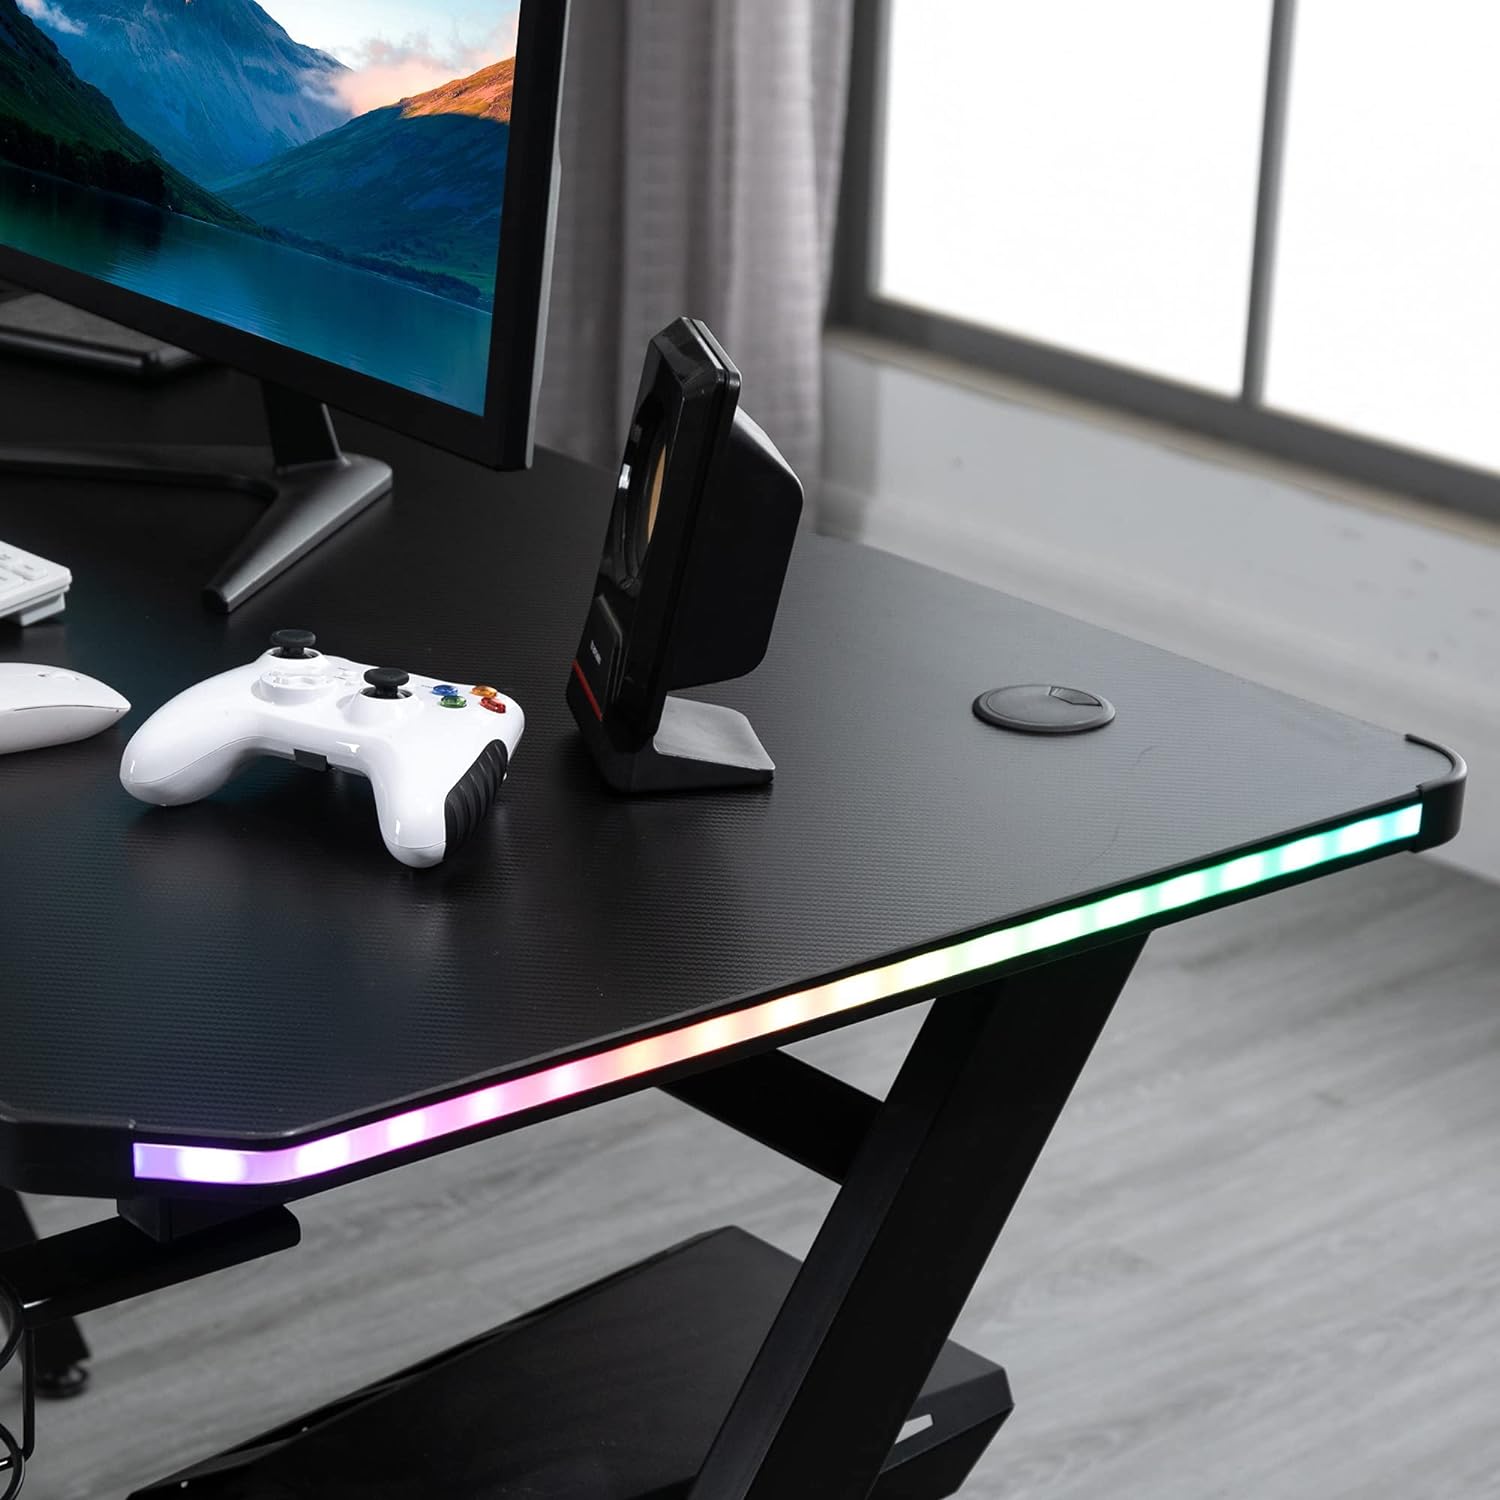 Maplin Plus Racing Style Gaming Desk with RGB LED Lights, Carbon Fibre Surface, Headphone Hook, Cup Holder & Controller Rack - maplin.co.uk